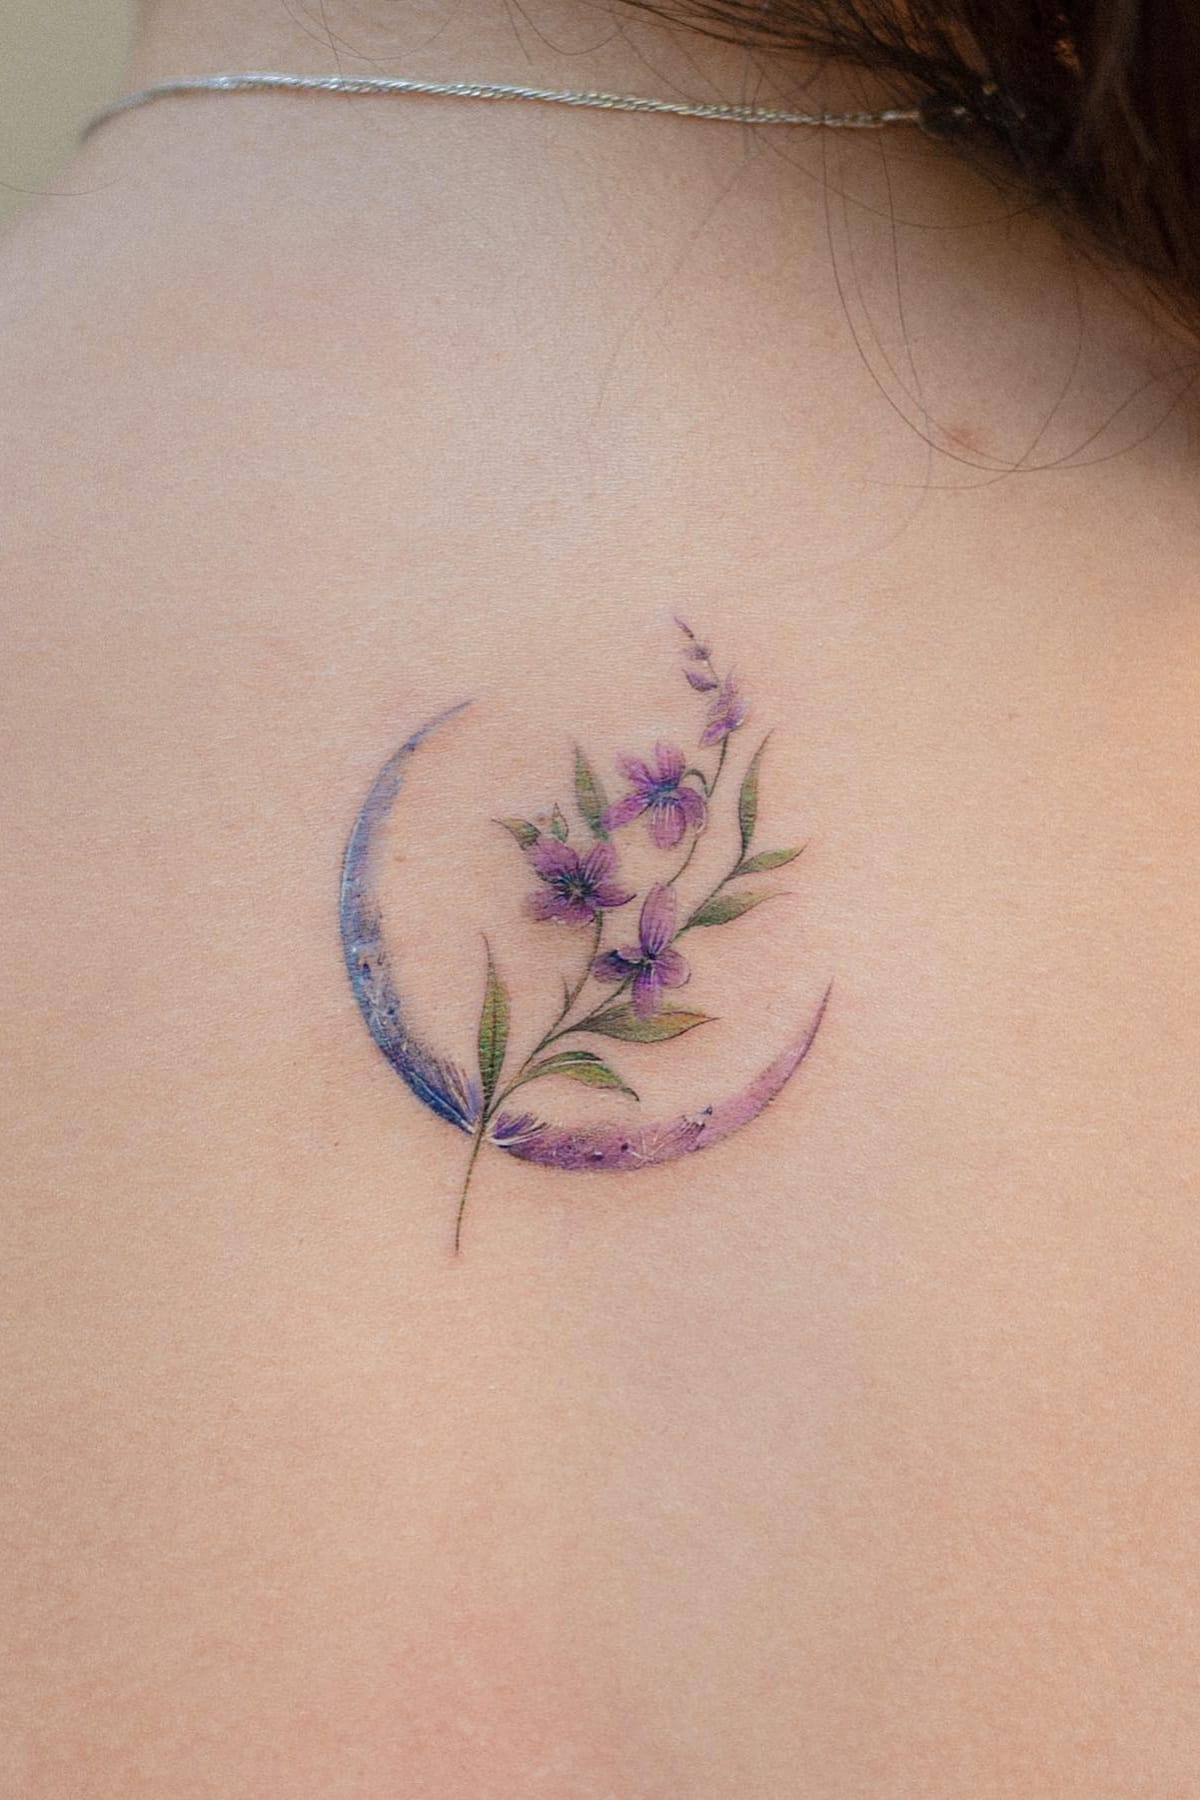 Small flower tattoo with moon